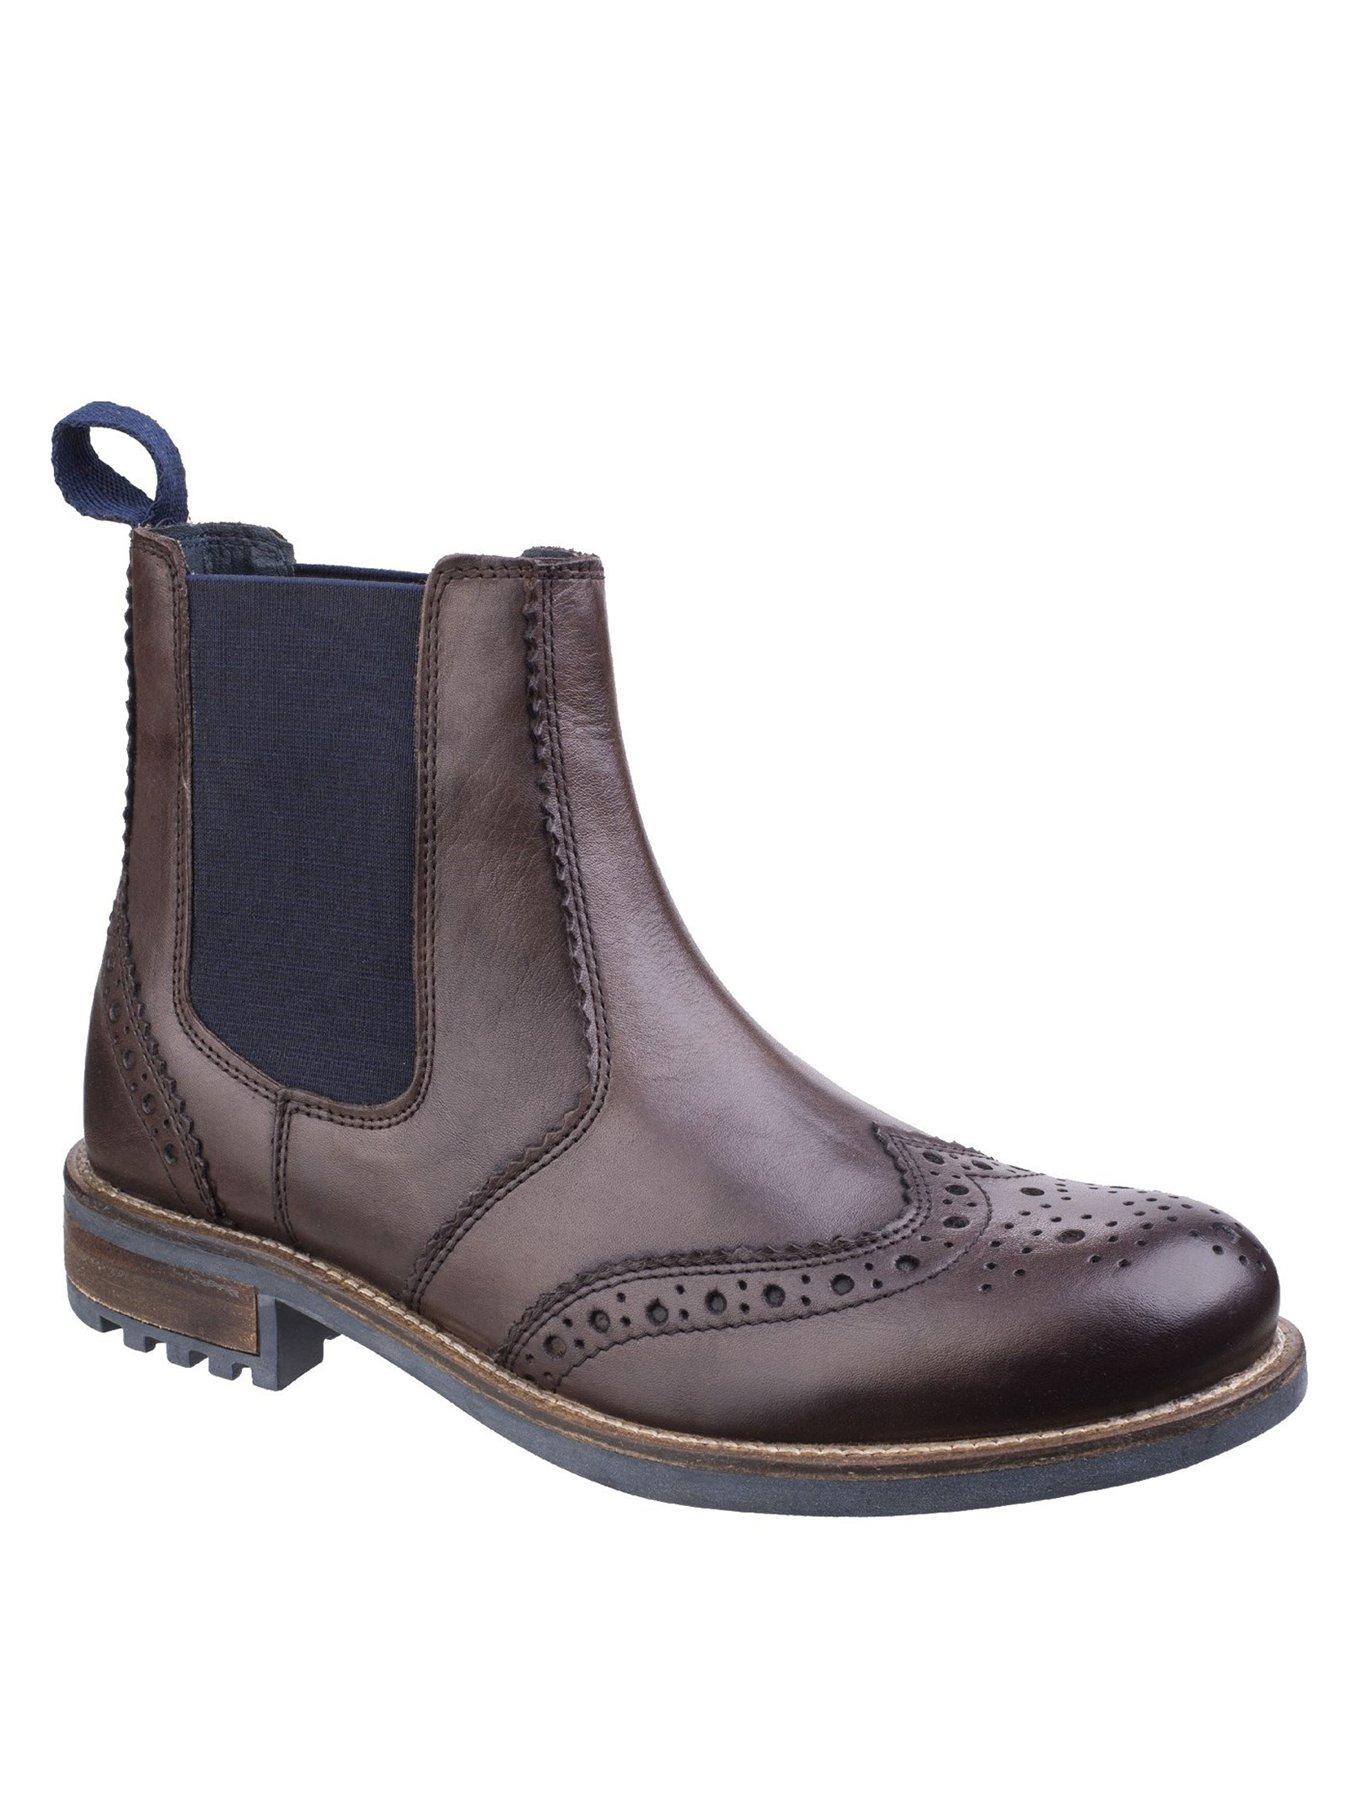 Shoes & boots Cirencester Leather Brogue Boots - Brown